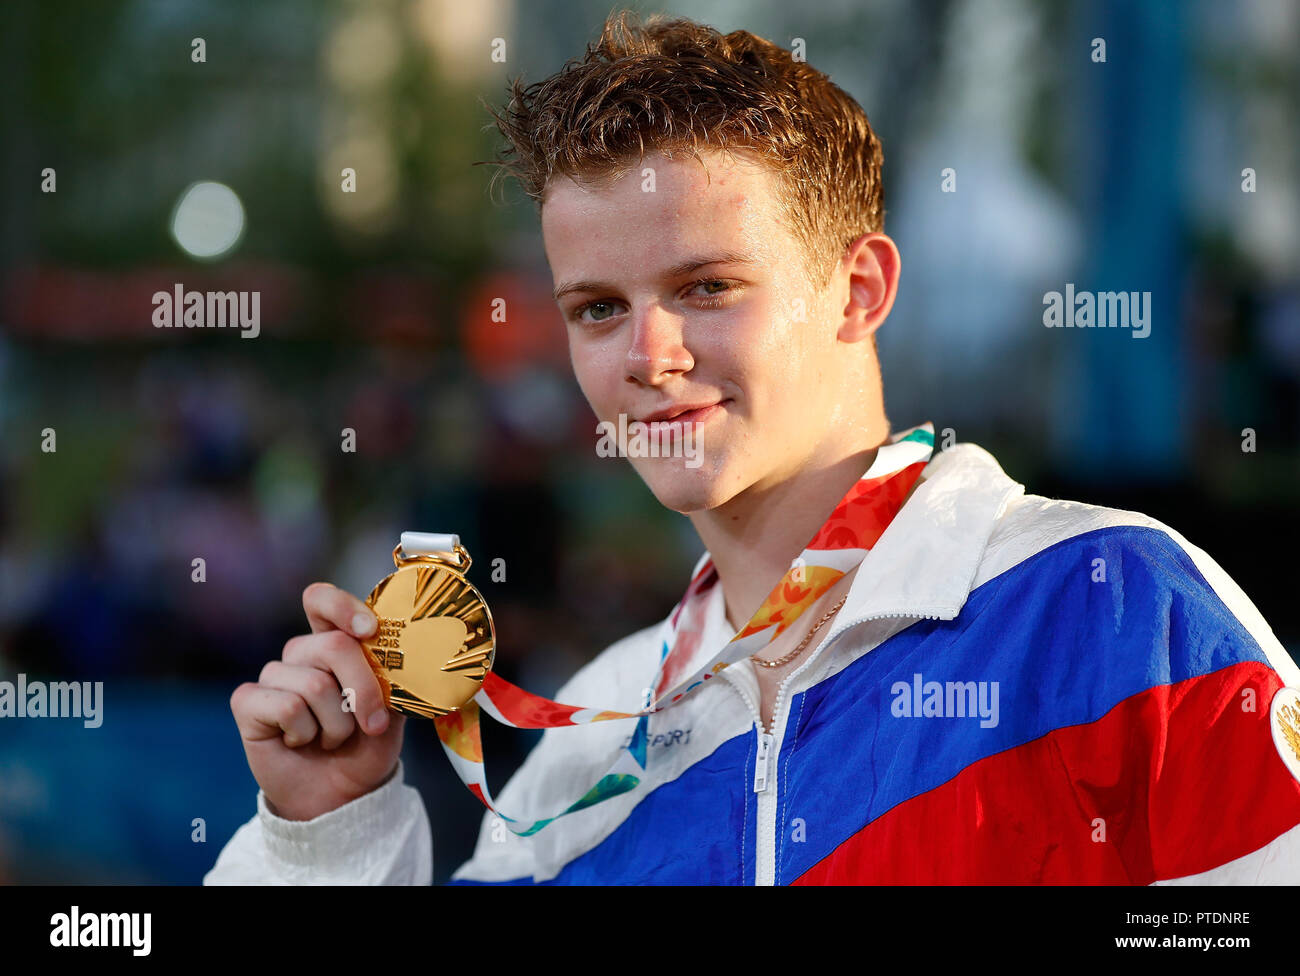 (181009) -- BUENOS AIRES, Oct. 9, 2018 (Xinhua) -- Russia's Bumblebee poses with his medal during the Breaking B-Boys Gold Medal Battle at the 2018 Summer Youth Olympic Games in Buenos Aires, Argentina on Oct. 8, 2018. Bumblebee claimed the title. (Xinhua/Wang Lili) Stock Photo